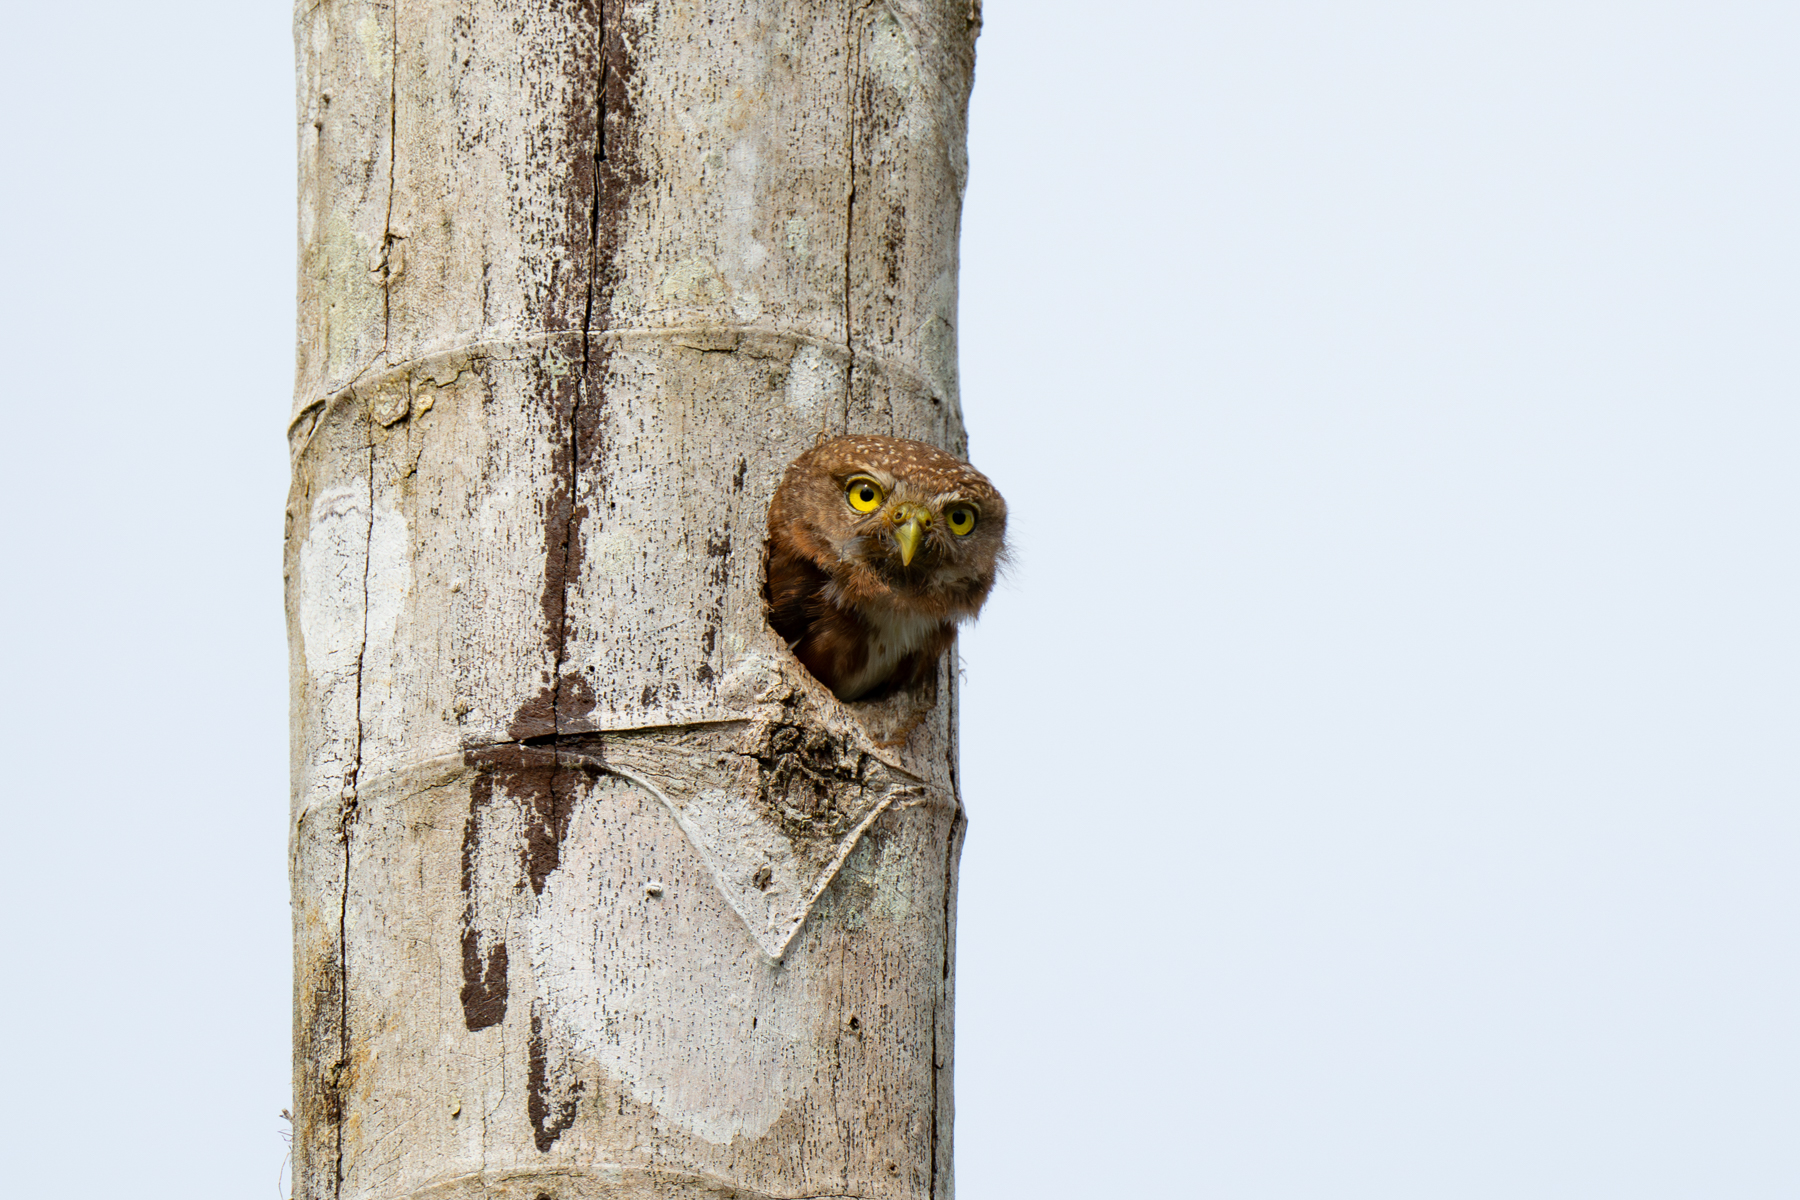 A Central American Pygmy Owl peers out from his nesting hole (image by Inger Vandyke)